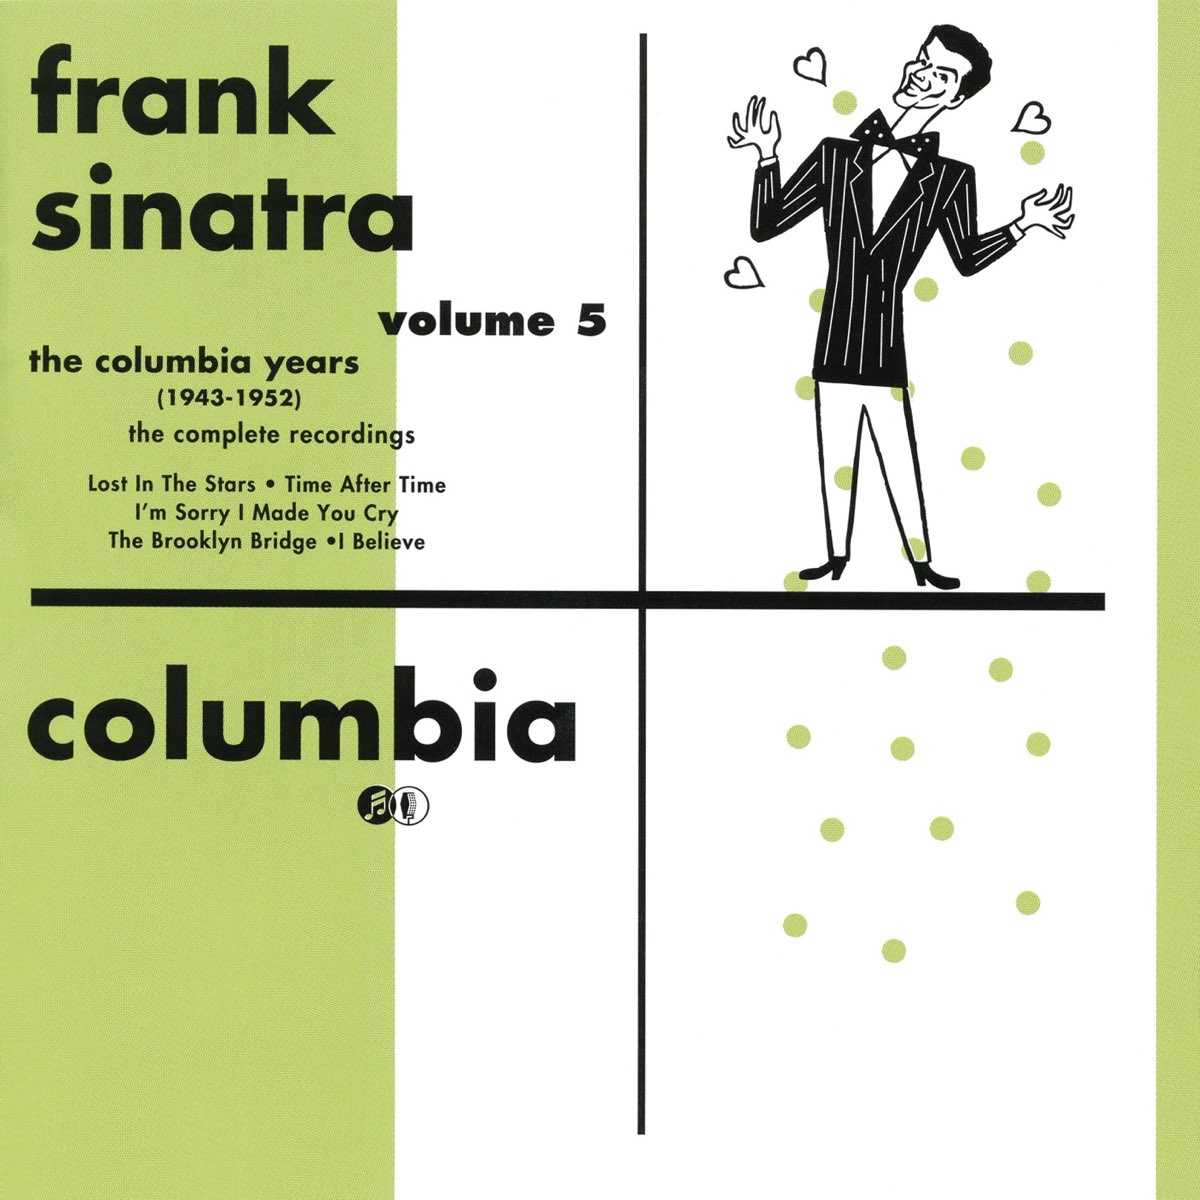 ‎the Columbia Years 1943 1952 The Complete Recordings Vol 5 By Frank Sinatra On Apple Music